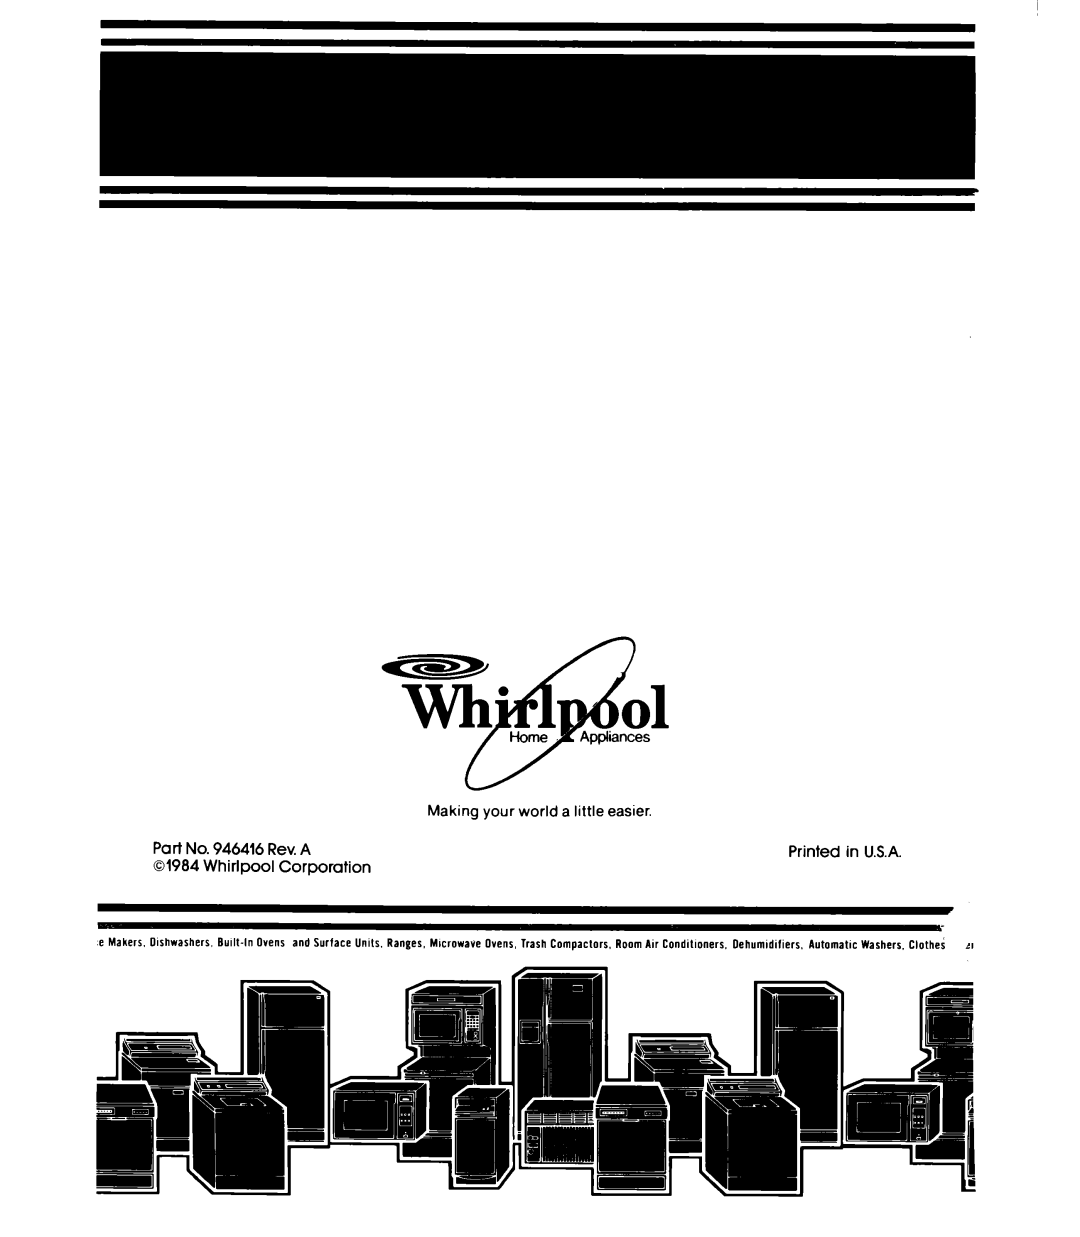 Whirlpool ETl8TK Making your world a little easier, Part No, Rev. A, Printed, in U.S.A, 01984, Corporation, Whirlpool 